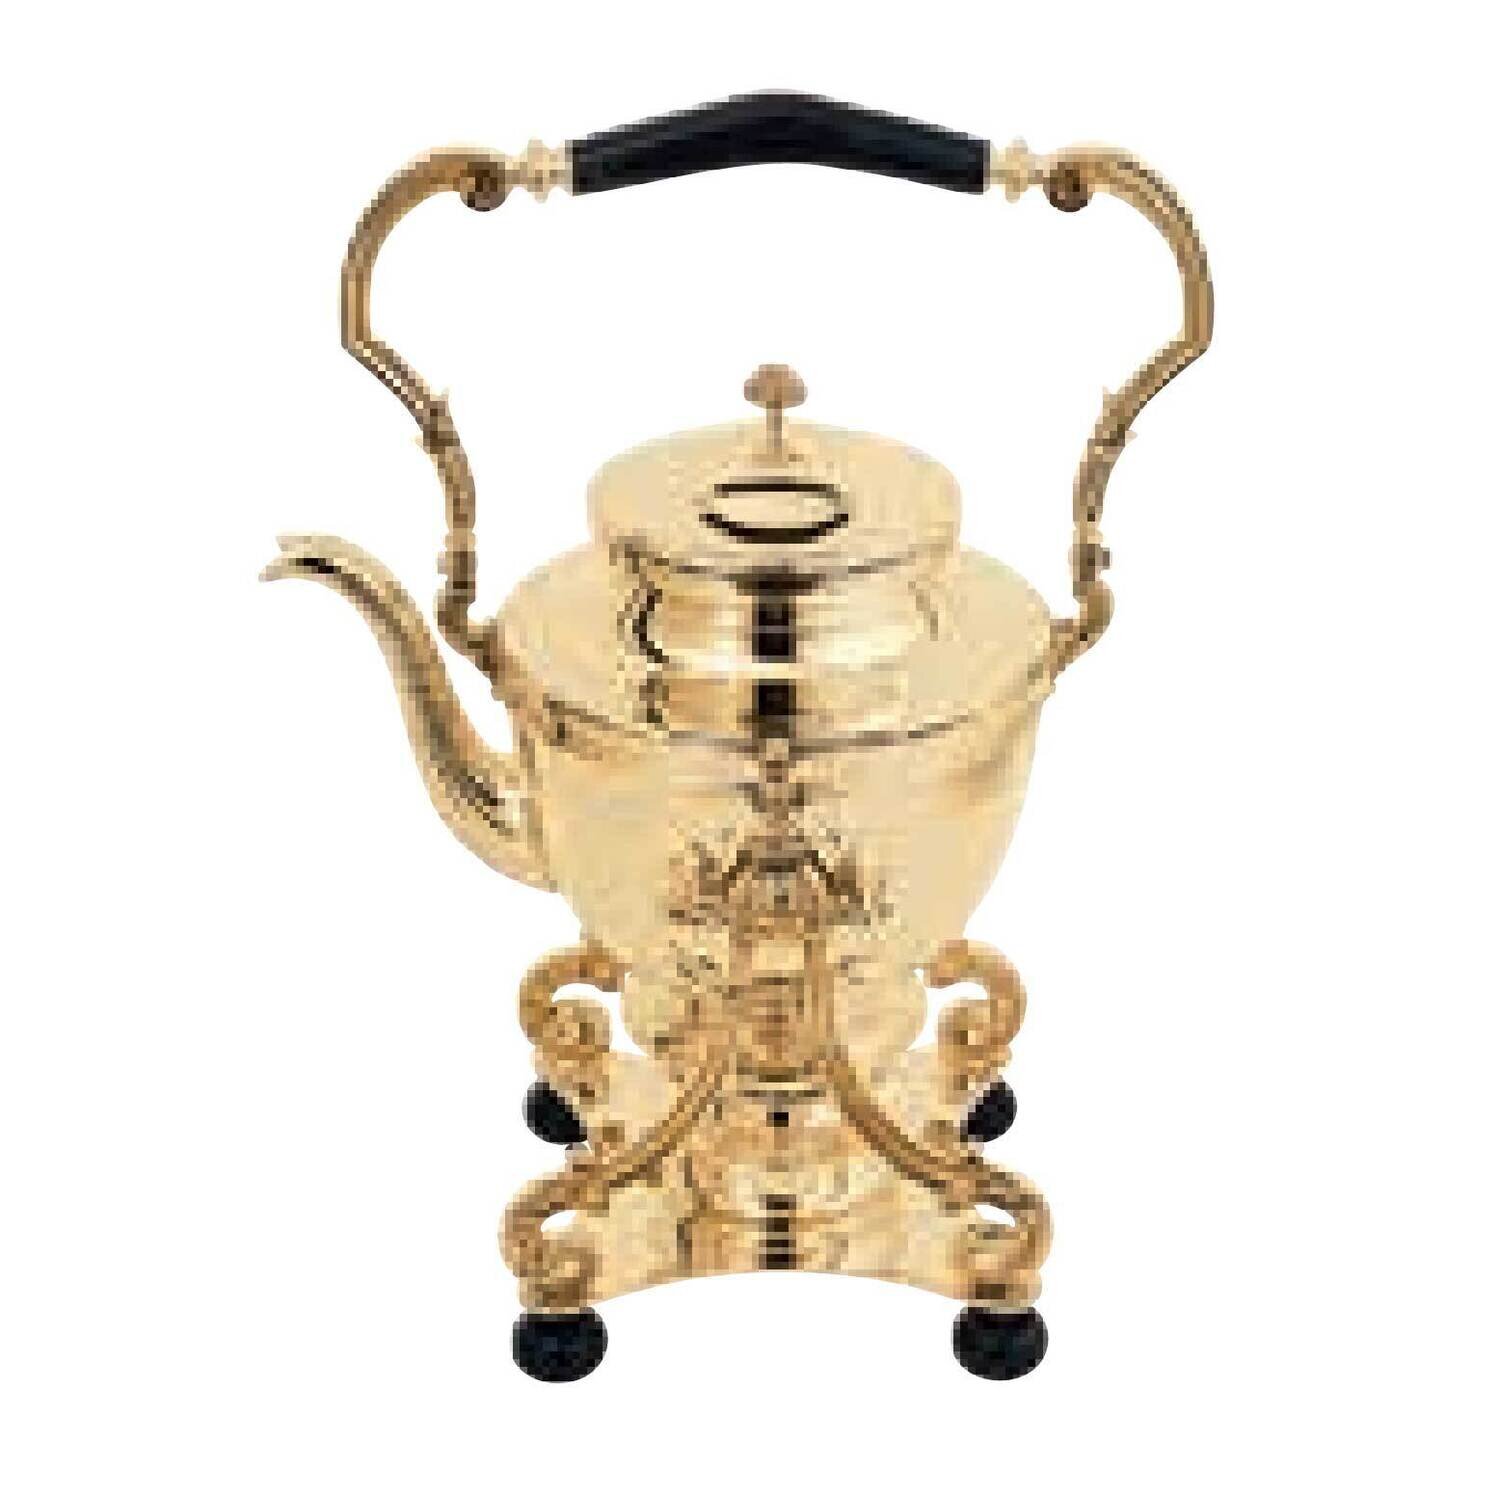 Ercuis Louis XV Kettle 15.75 Inch Gold Plated F503015220